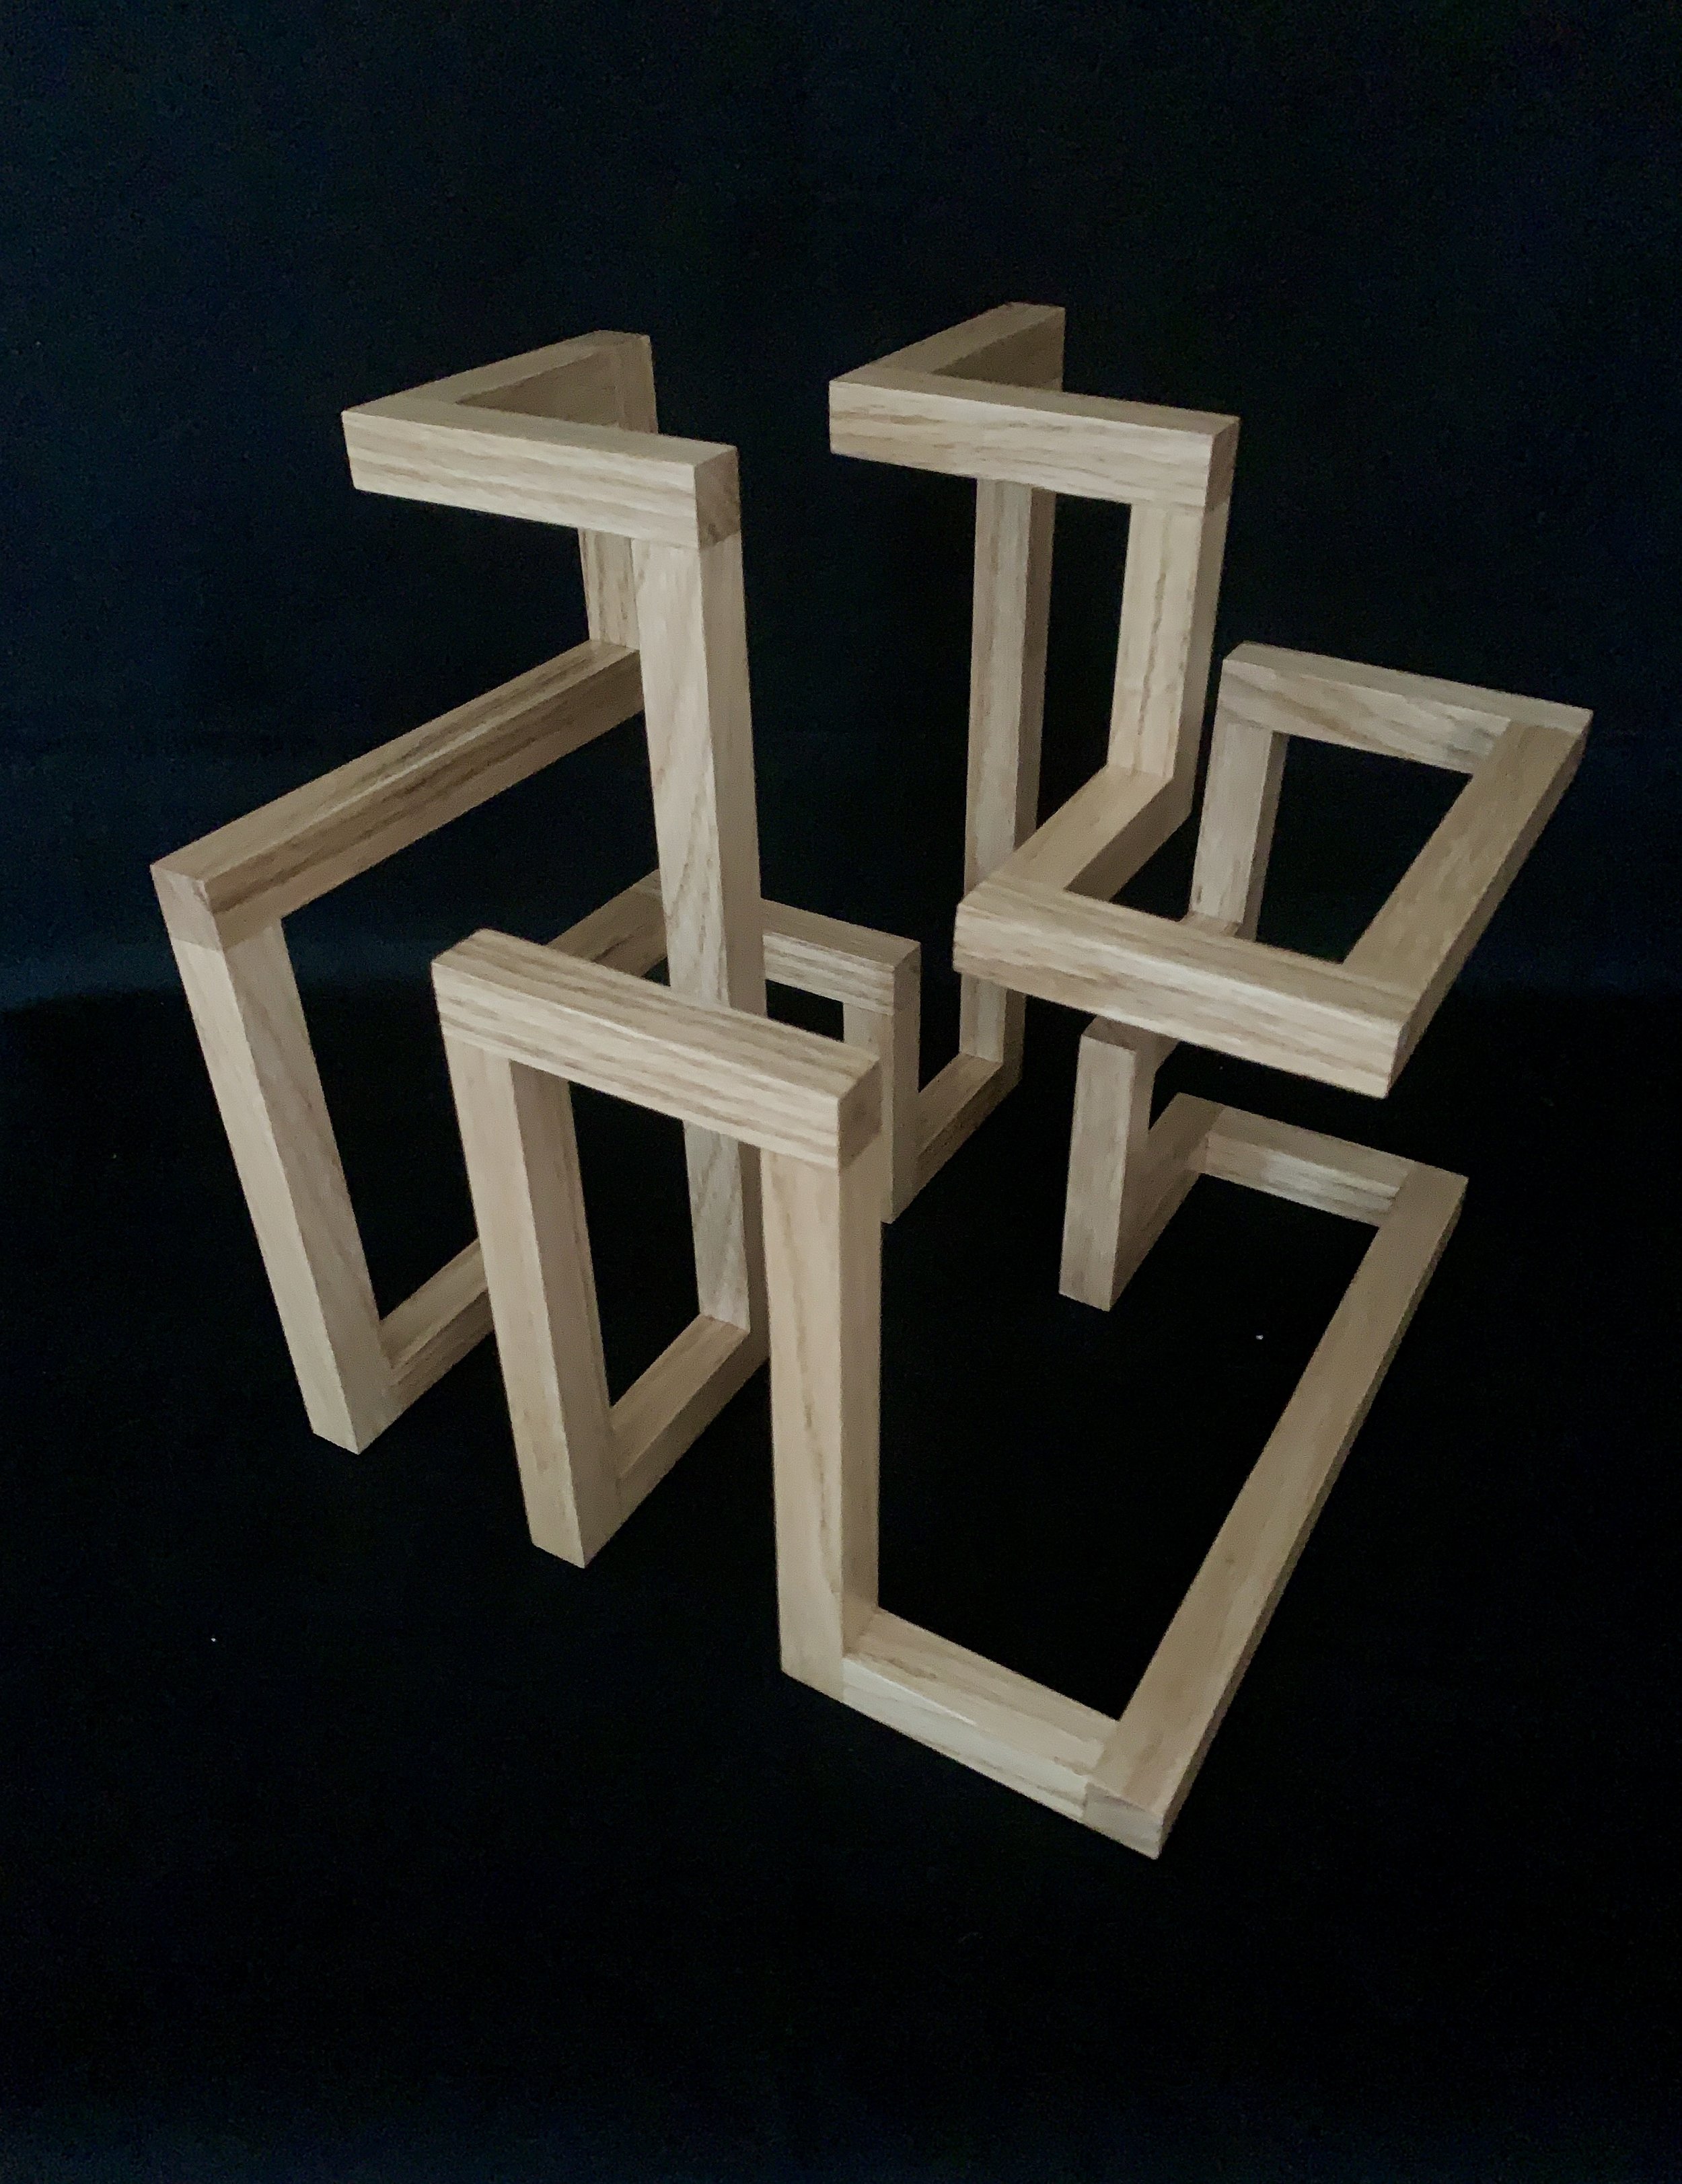 Structure_5 (Model)